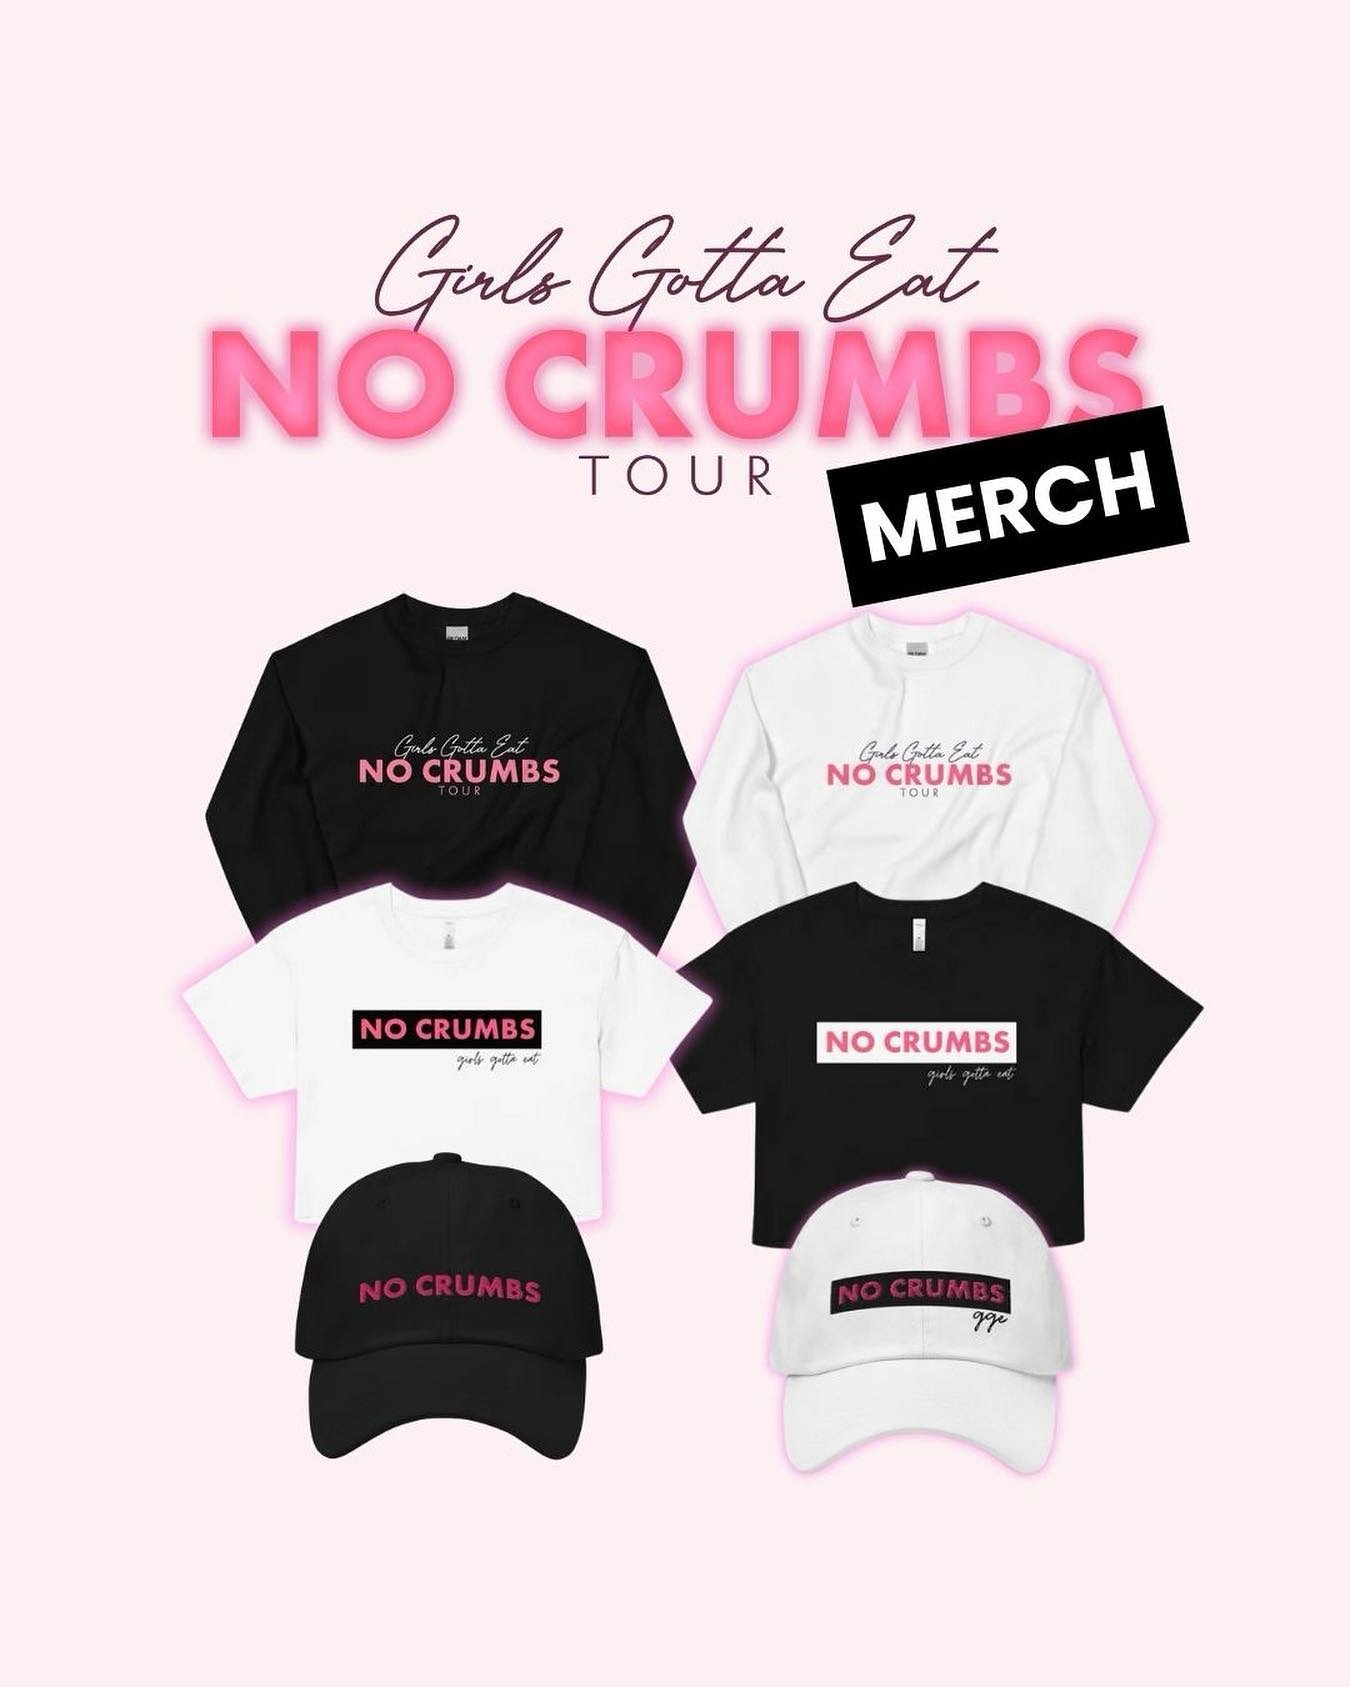 Get your tix then get your merch for the NO CRUMBS tour &mdash; on sale now at girlsgottaeatpodcast.shop! 💋